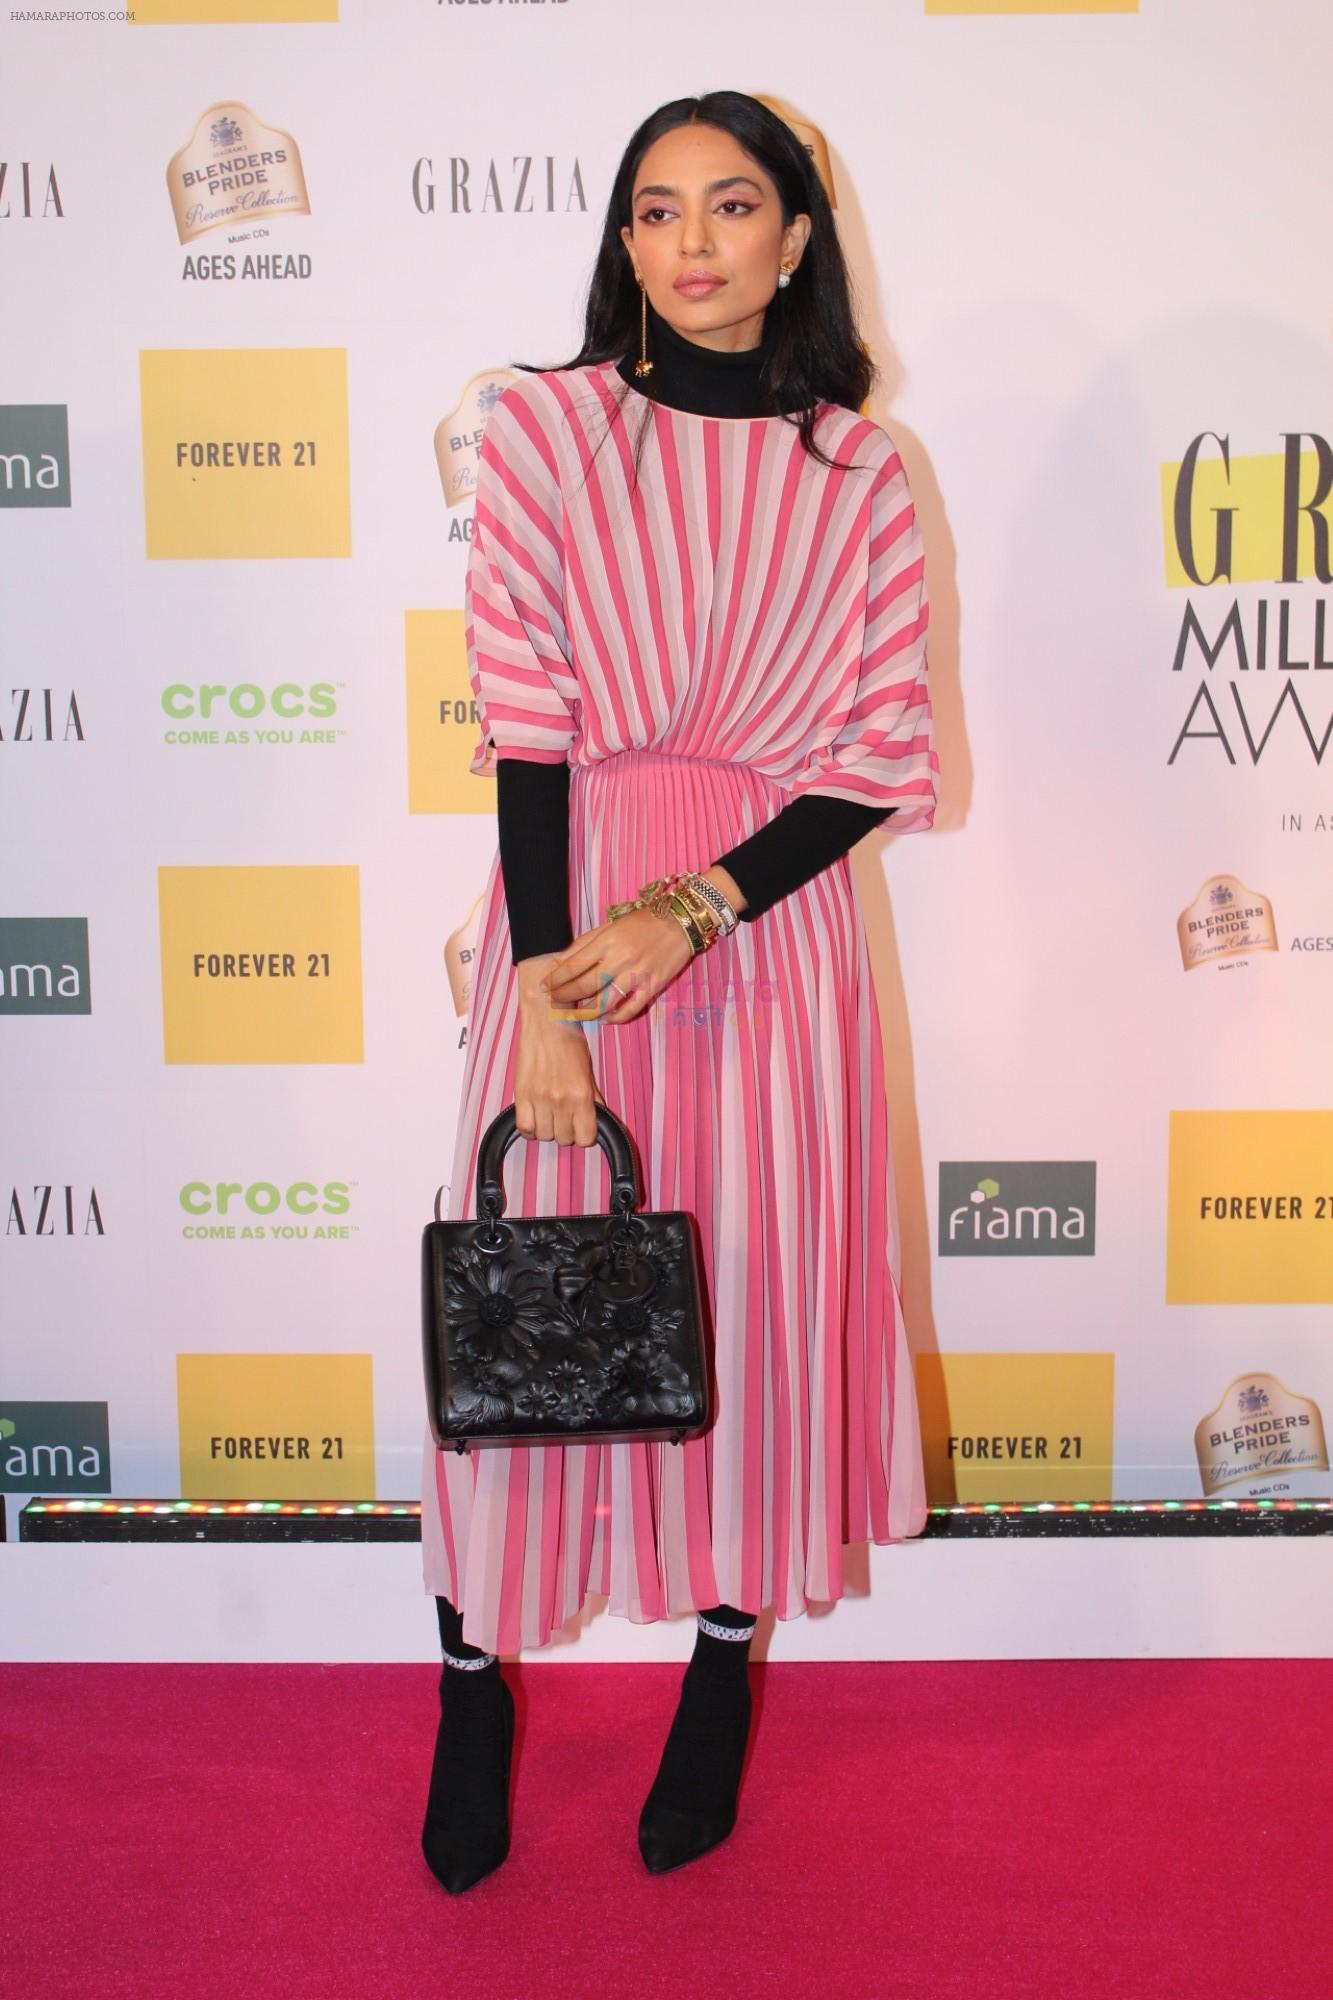 Prerna Arora at the Red Carpet of 1st Edition of Grazia Millennial Awards on 19th June 2019 on 19th June 2019